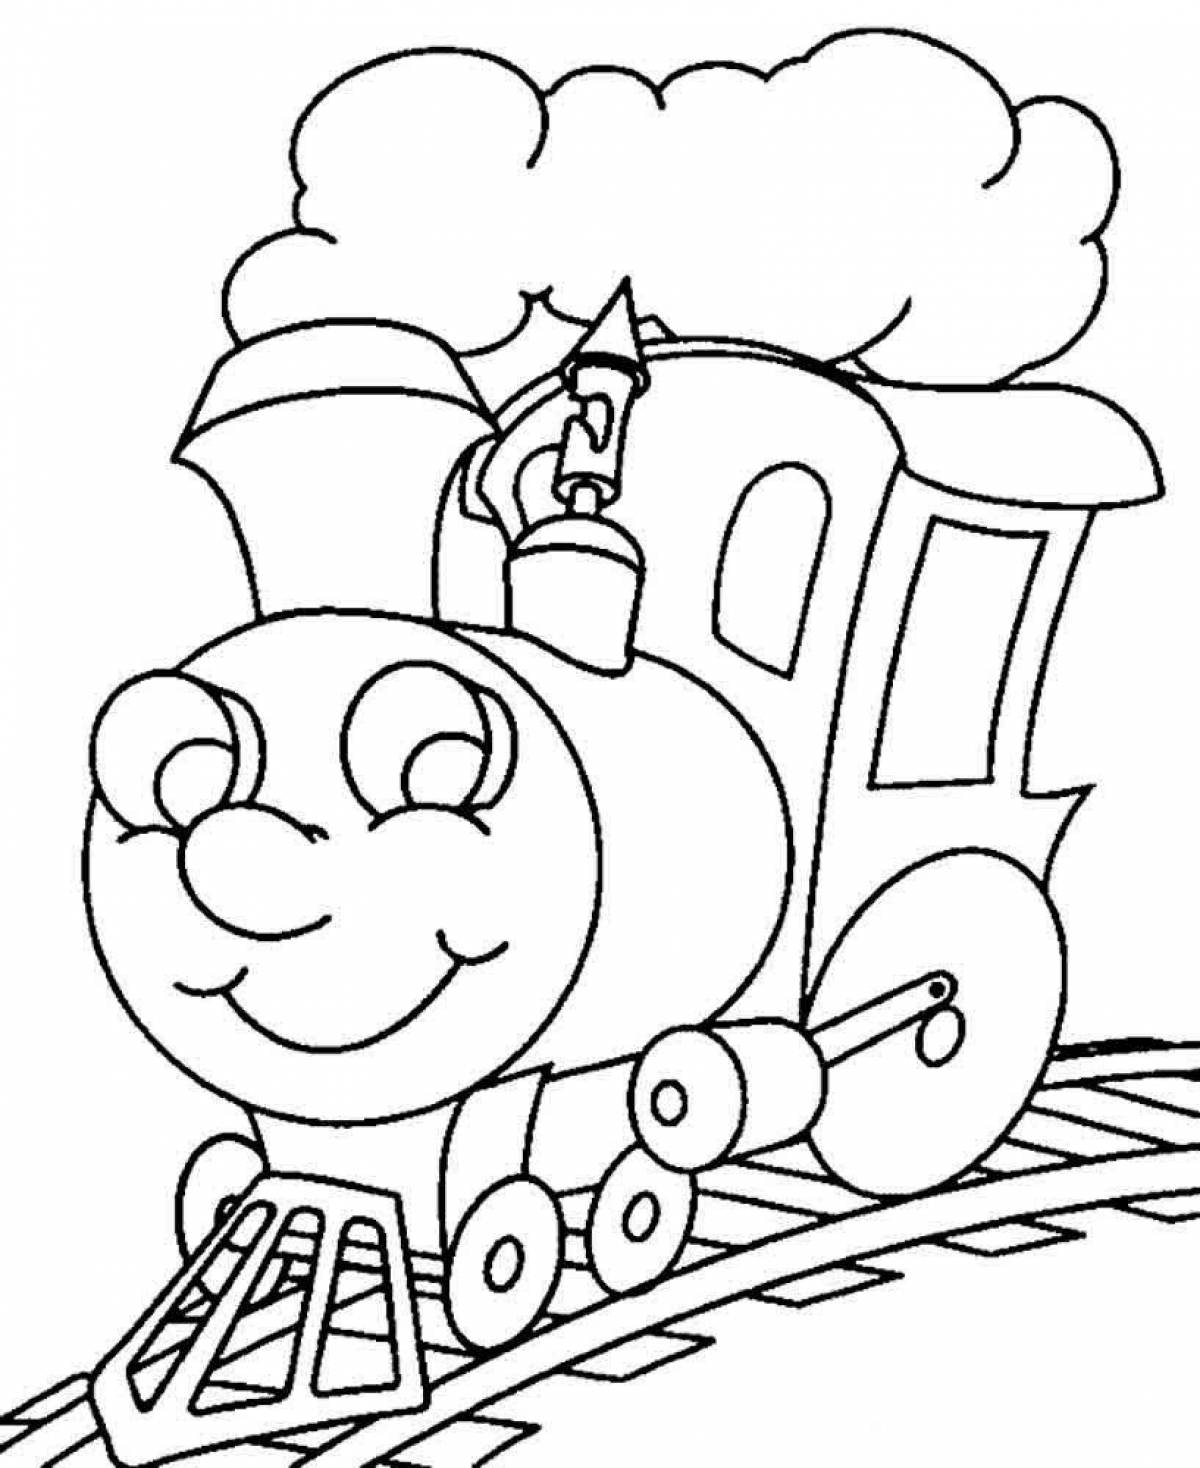 Funny train coloring book for kids